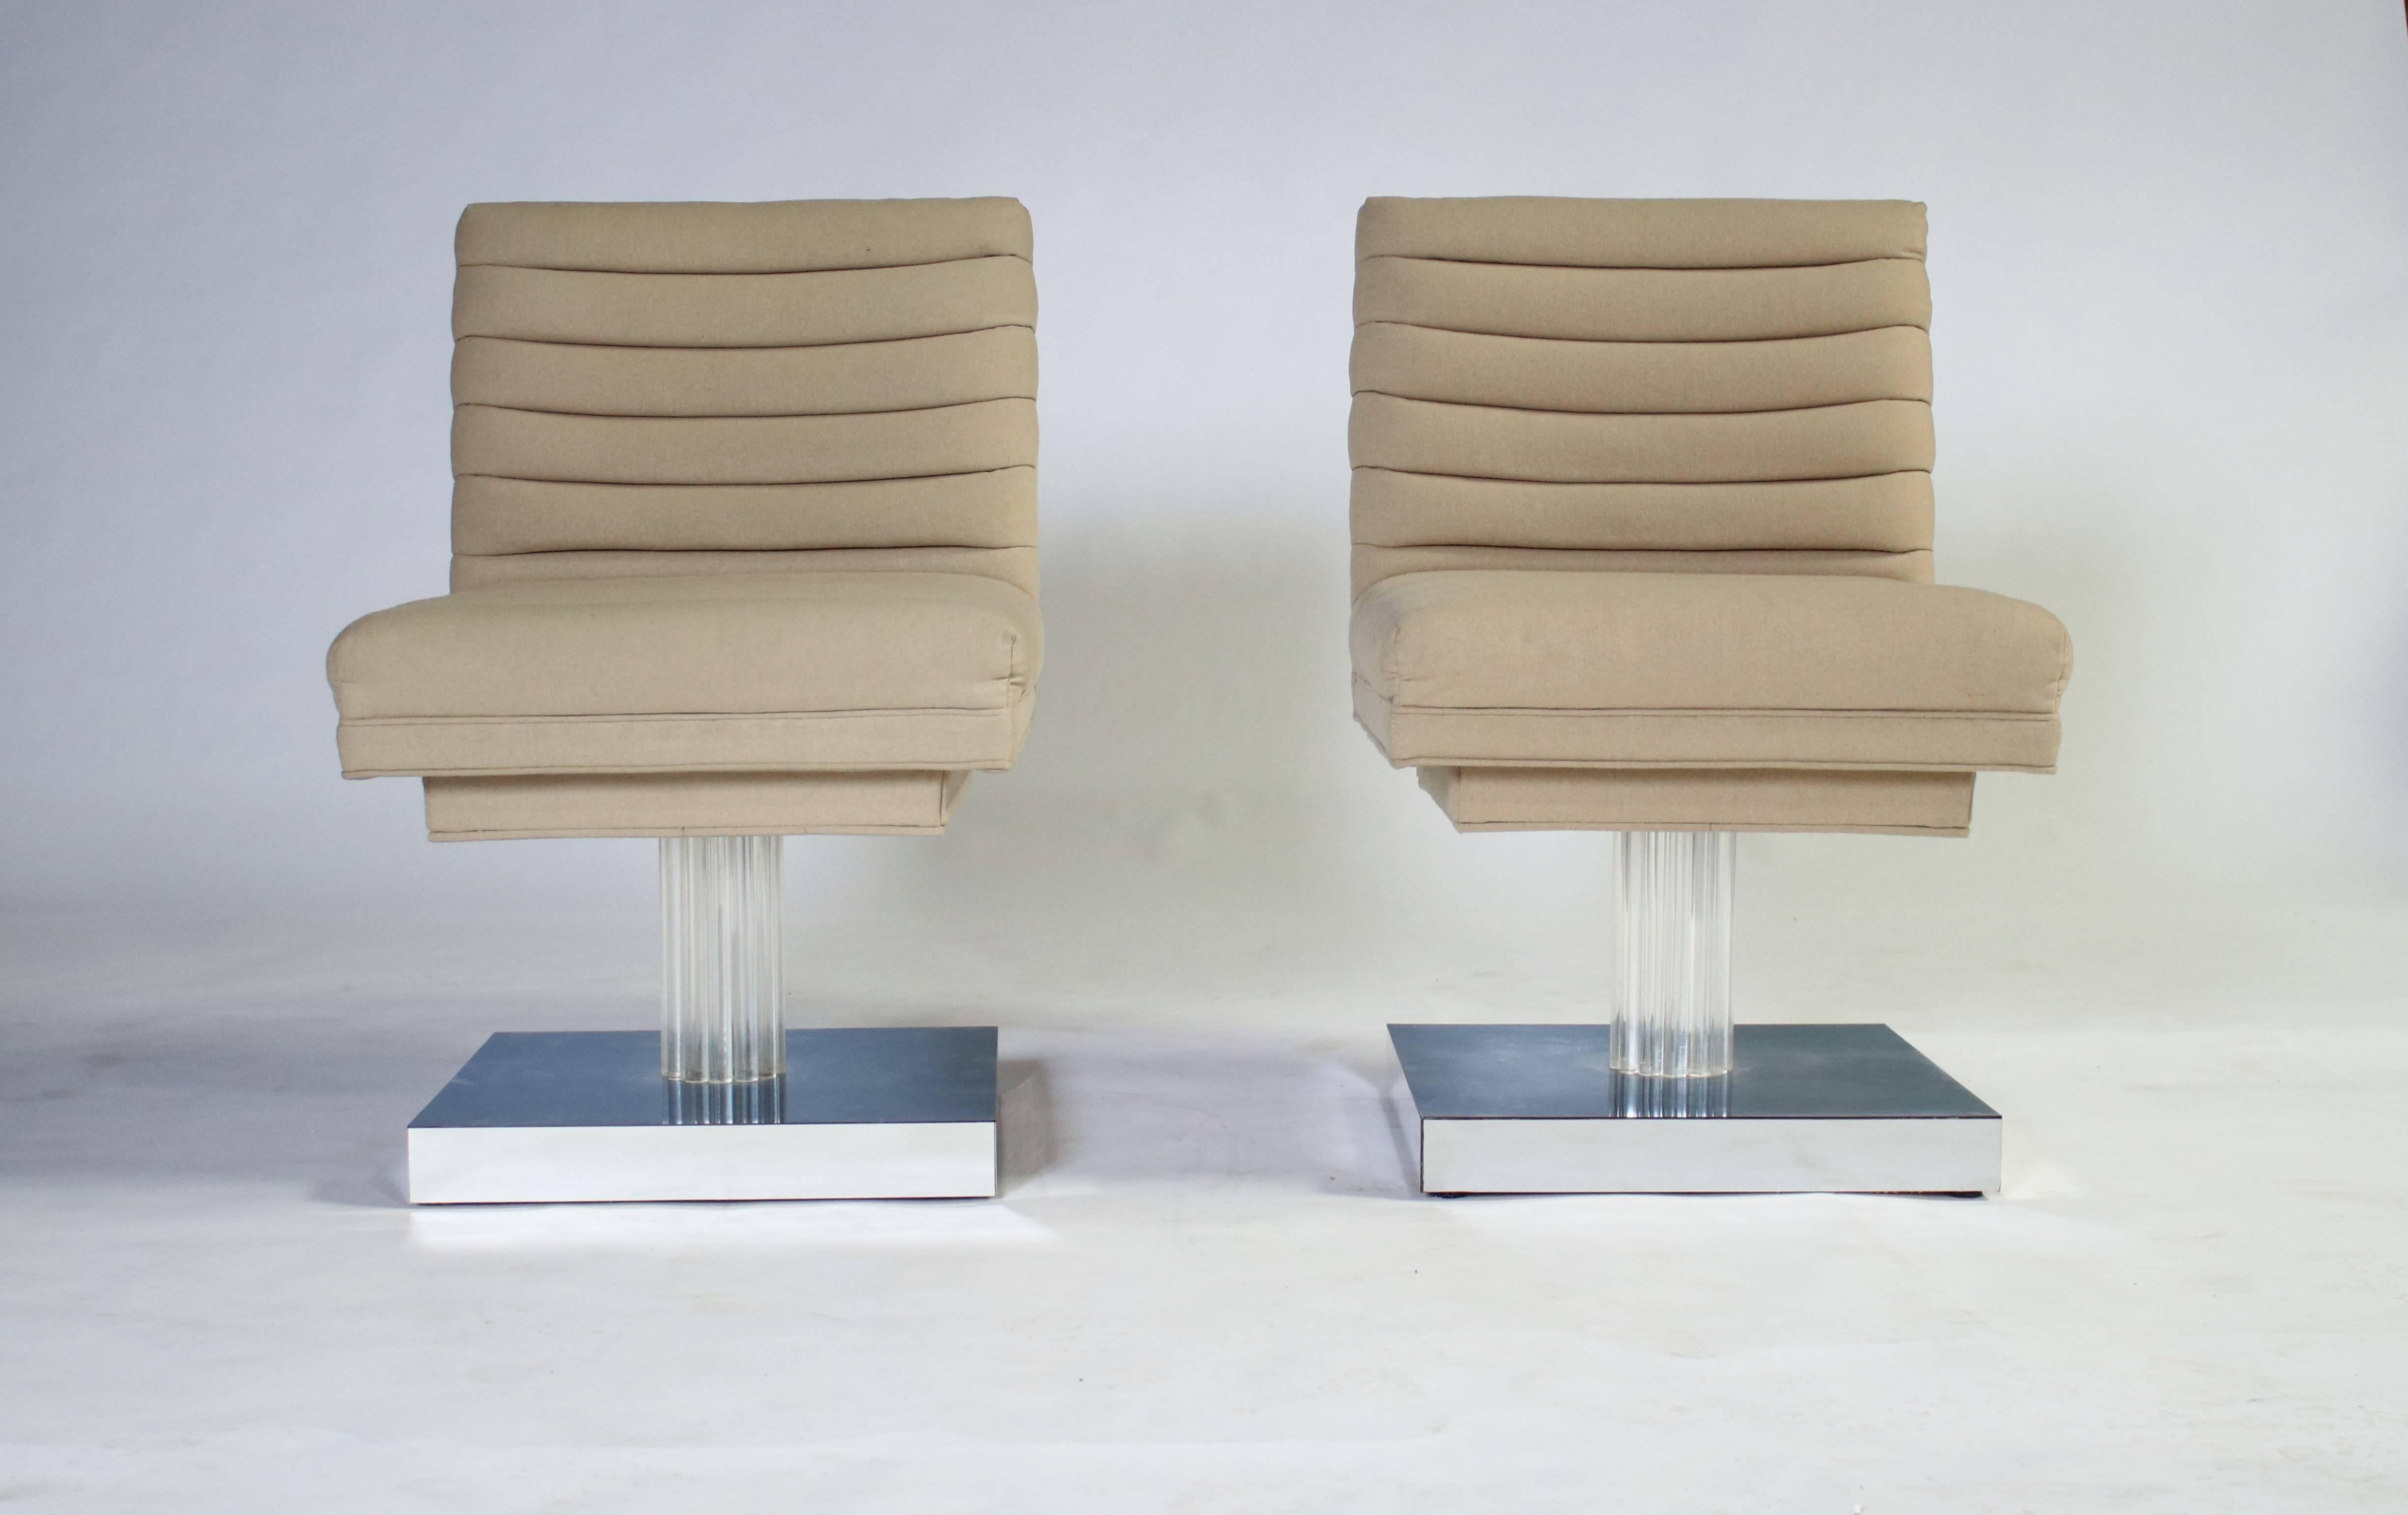 Unique 1970s swivel chairs on a Lucite and chrome plinth designed by Milo Baughman. Brilliant Space Age design with with channelled upholstered seating which rotates 360 degrees and in excellent condition.
                